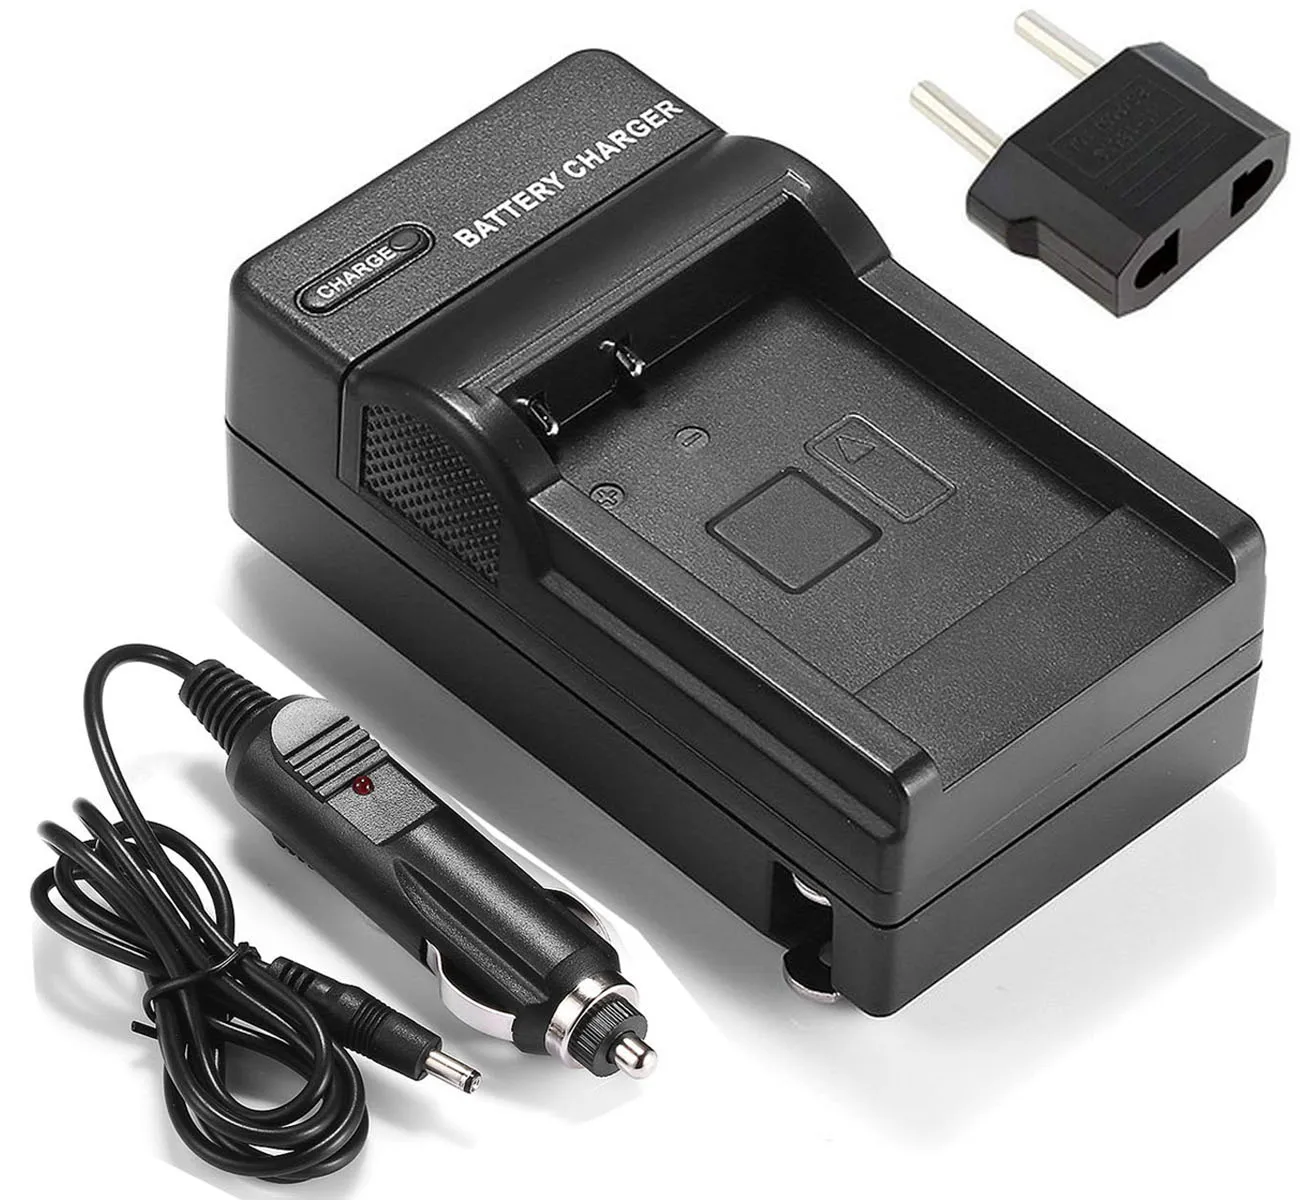 NV-GS11 NV-GS15 Camcorder Battery Charger for Panasonic NV-GS1 NV-GS3 NV-GS4 NV-GS5